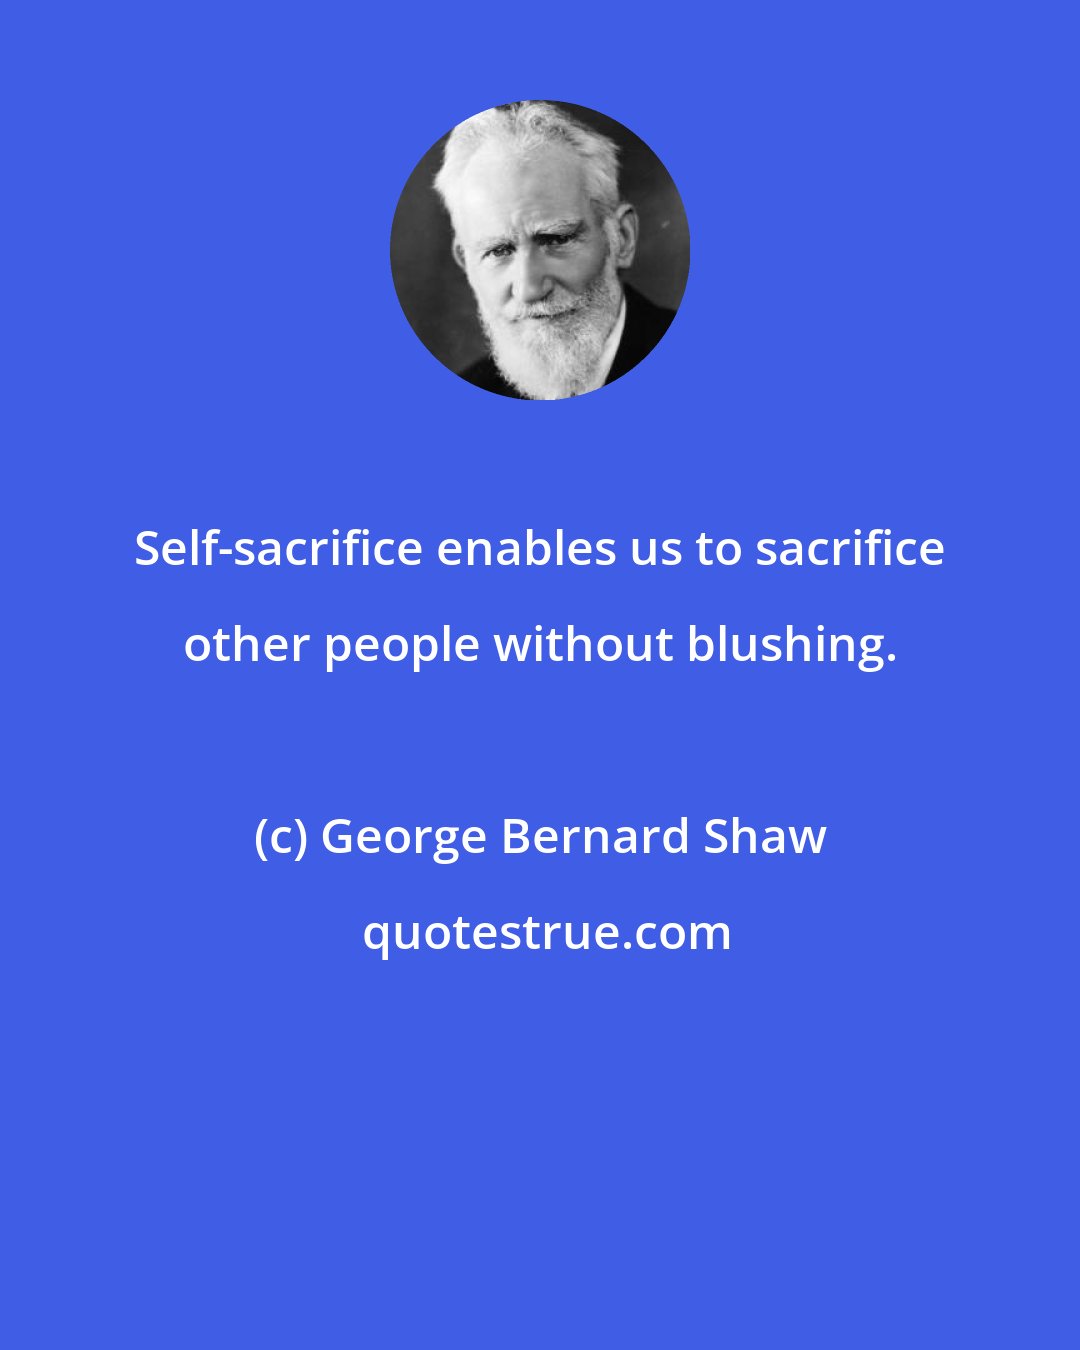 George Bernard Shaw: Self-sacrifice enables us to sacrifice other people without blushing.